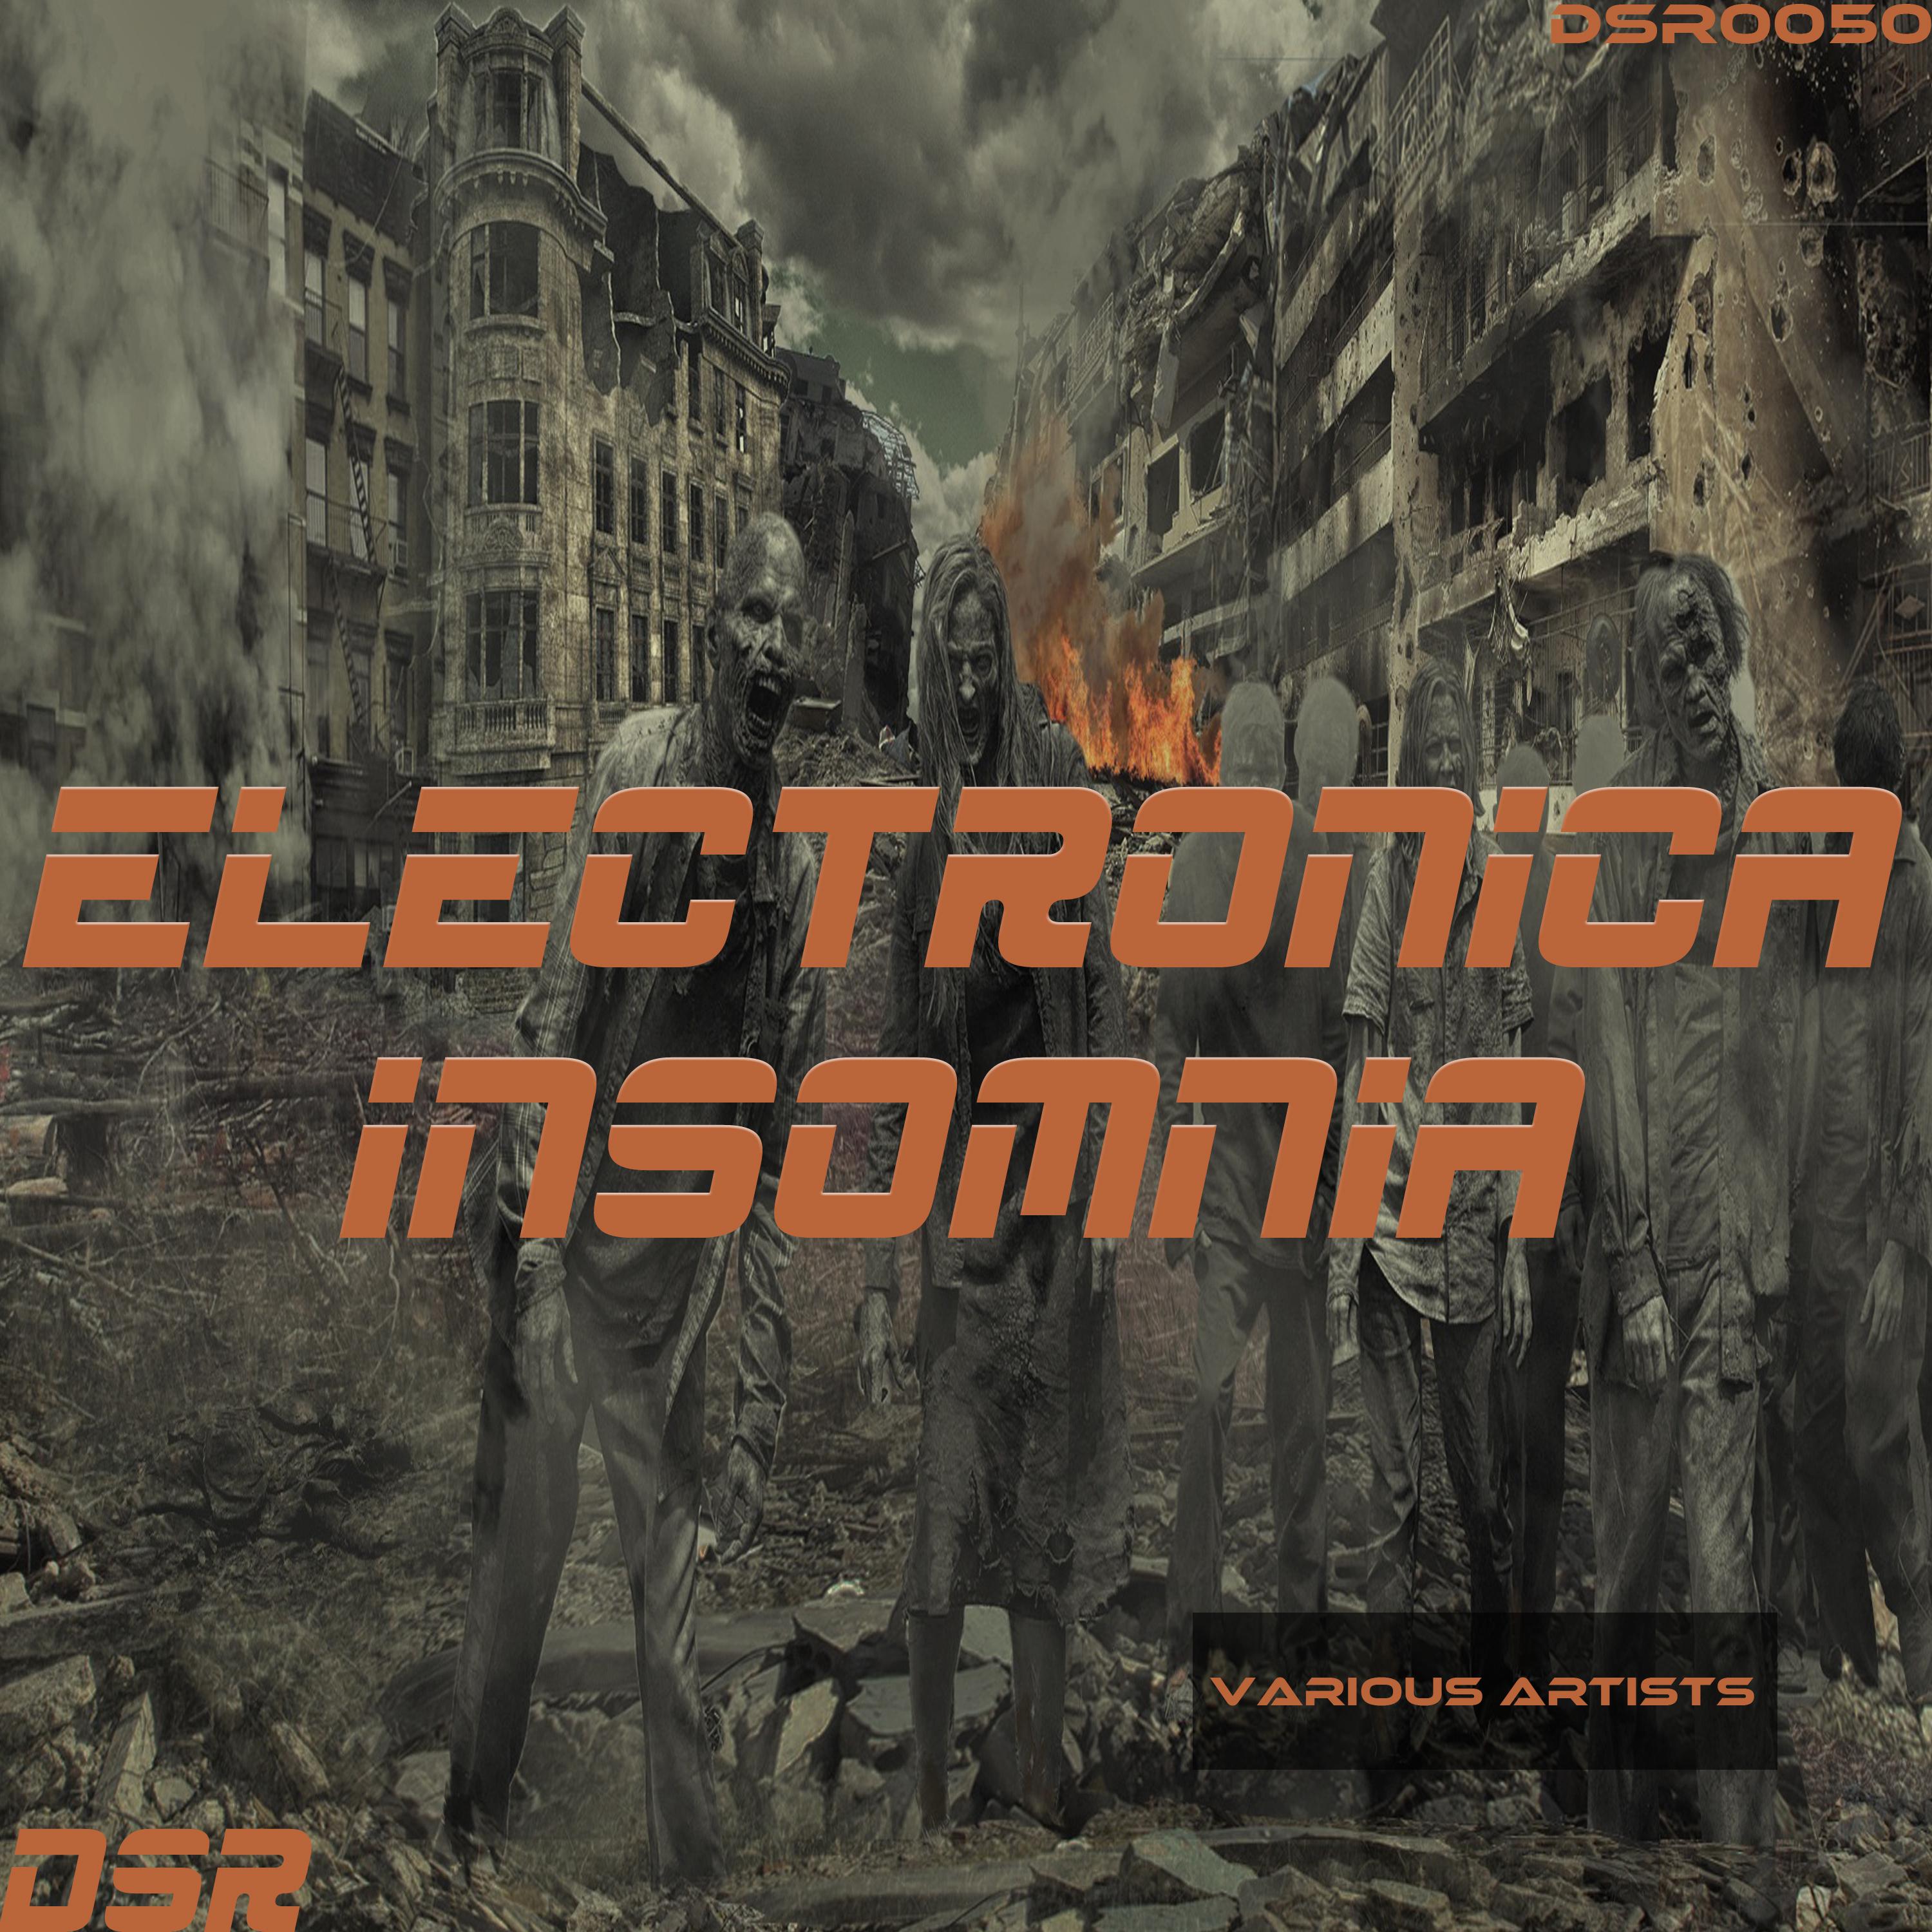 Electronica Insomnia